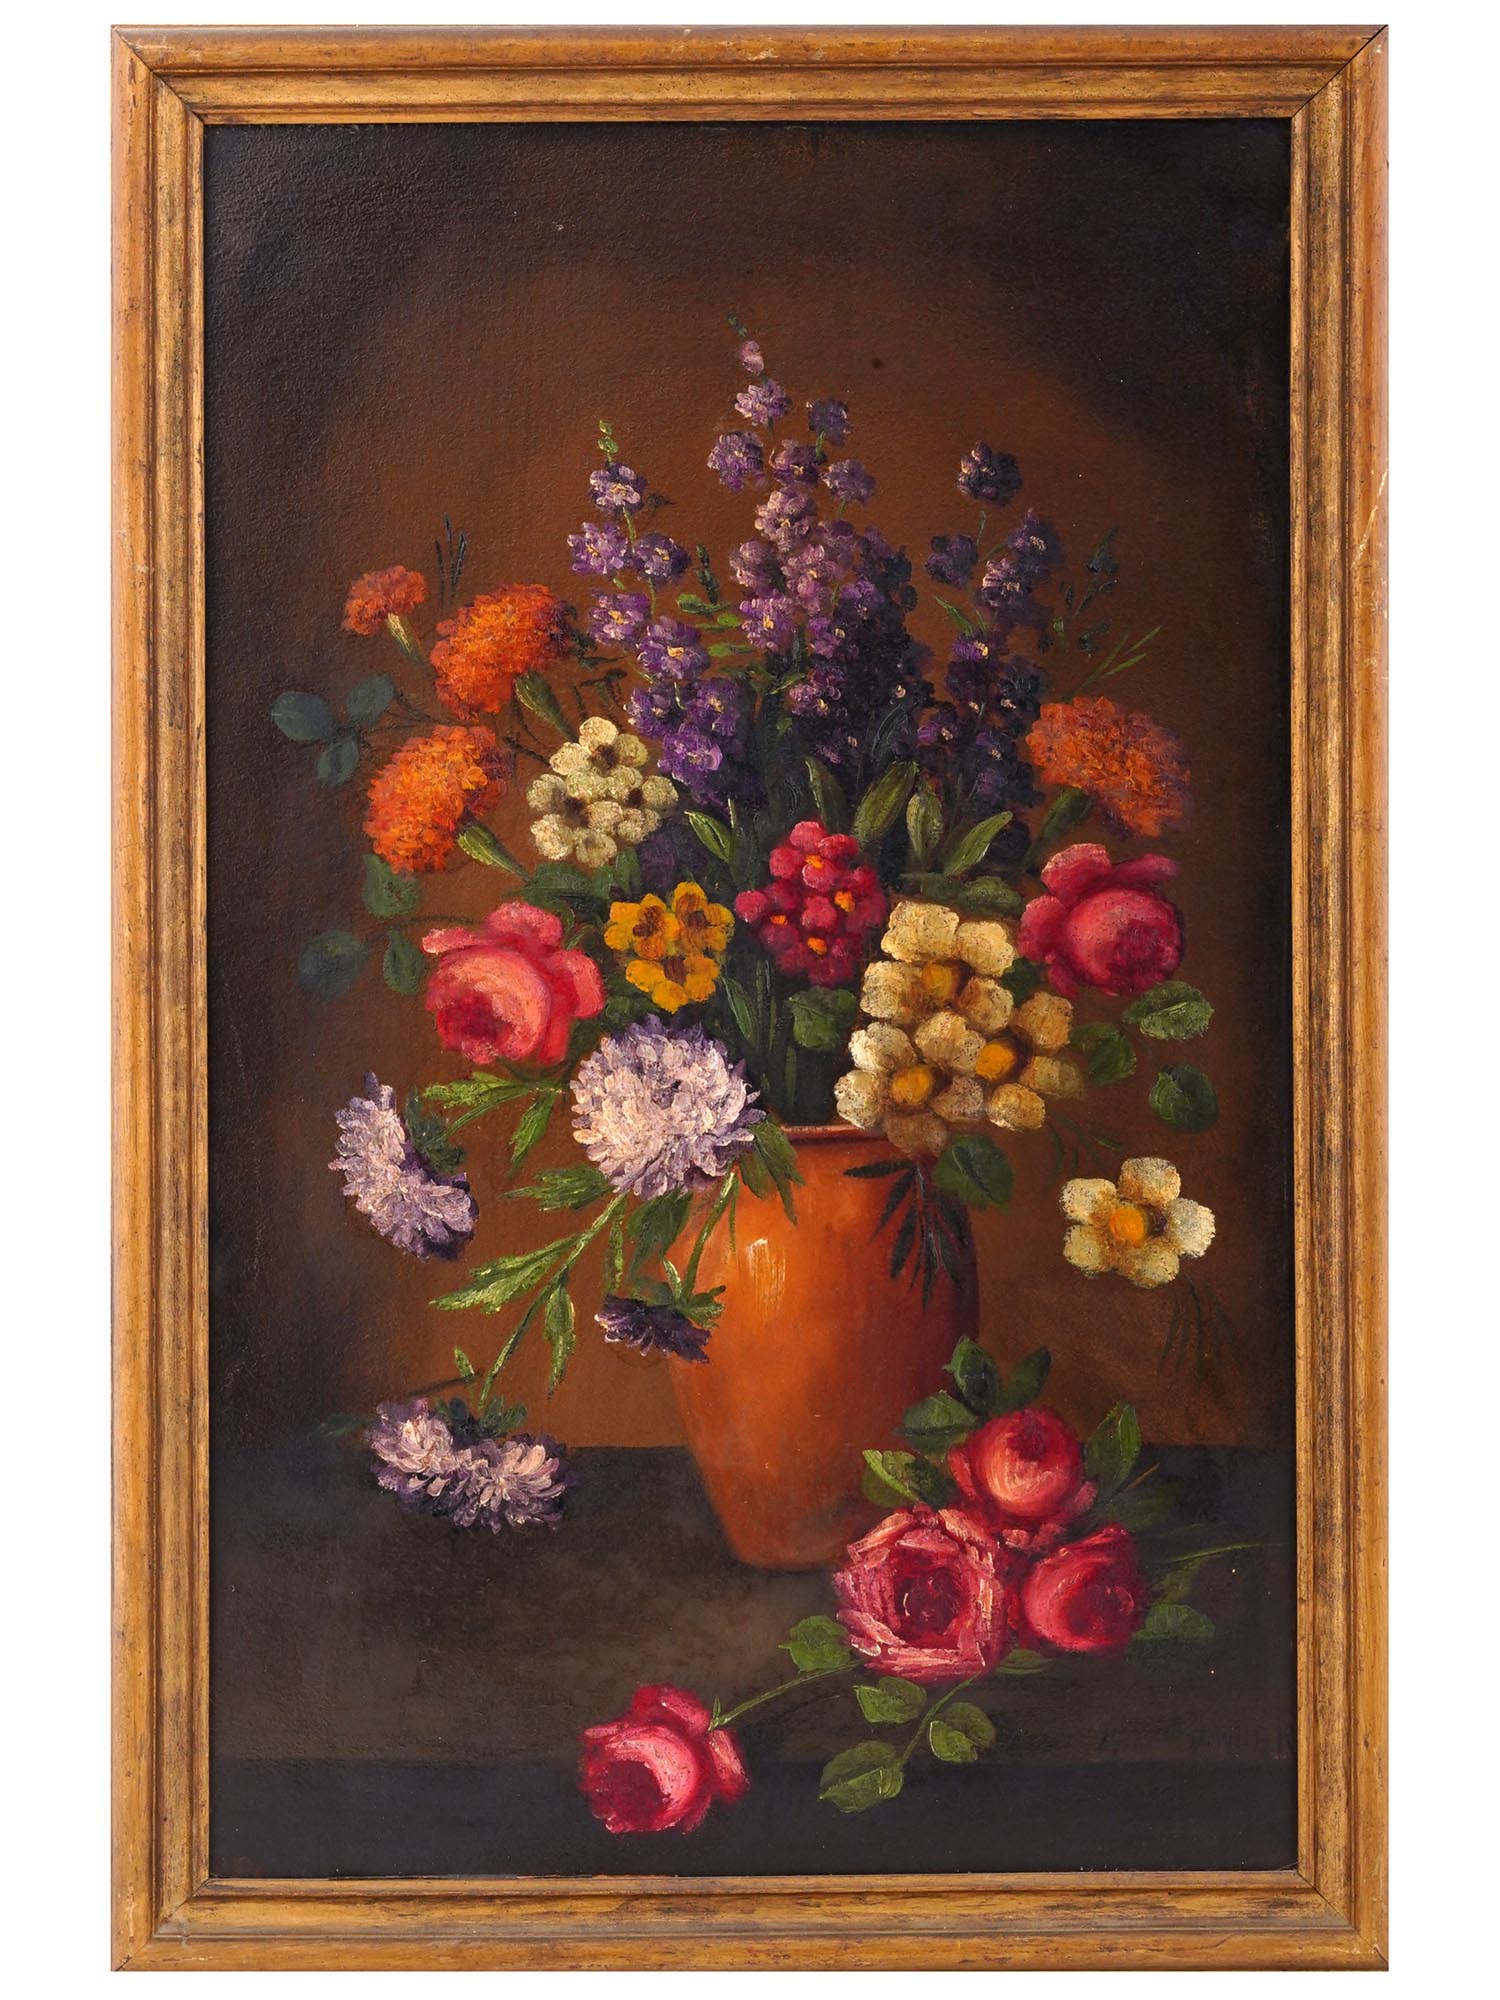 AMERICAN STILL LIFE OIL PAINTING BY HENRY LEON SANGER PIC-0